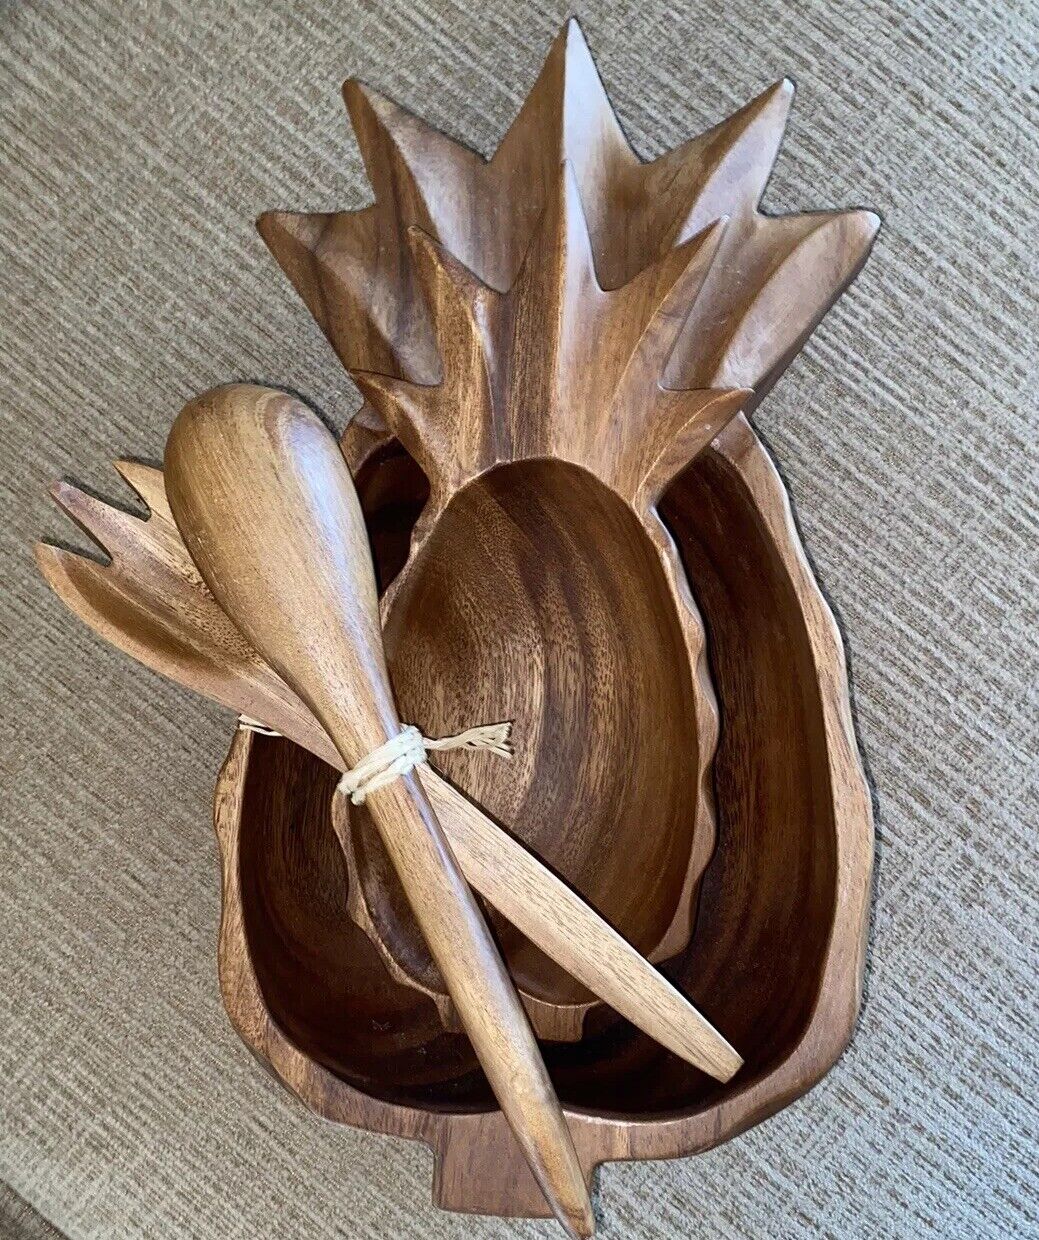 4 Piece Wooden Pineapple Set 2 Bowls With Utensils